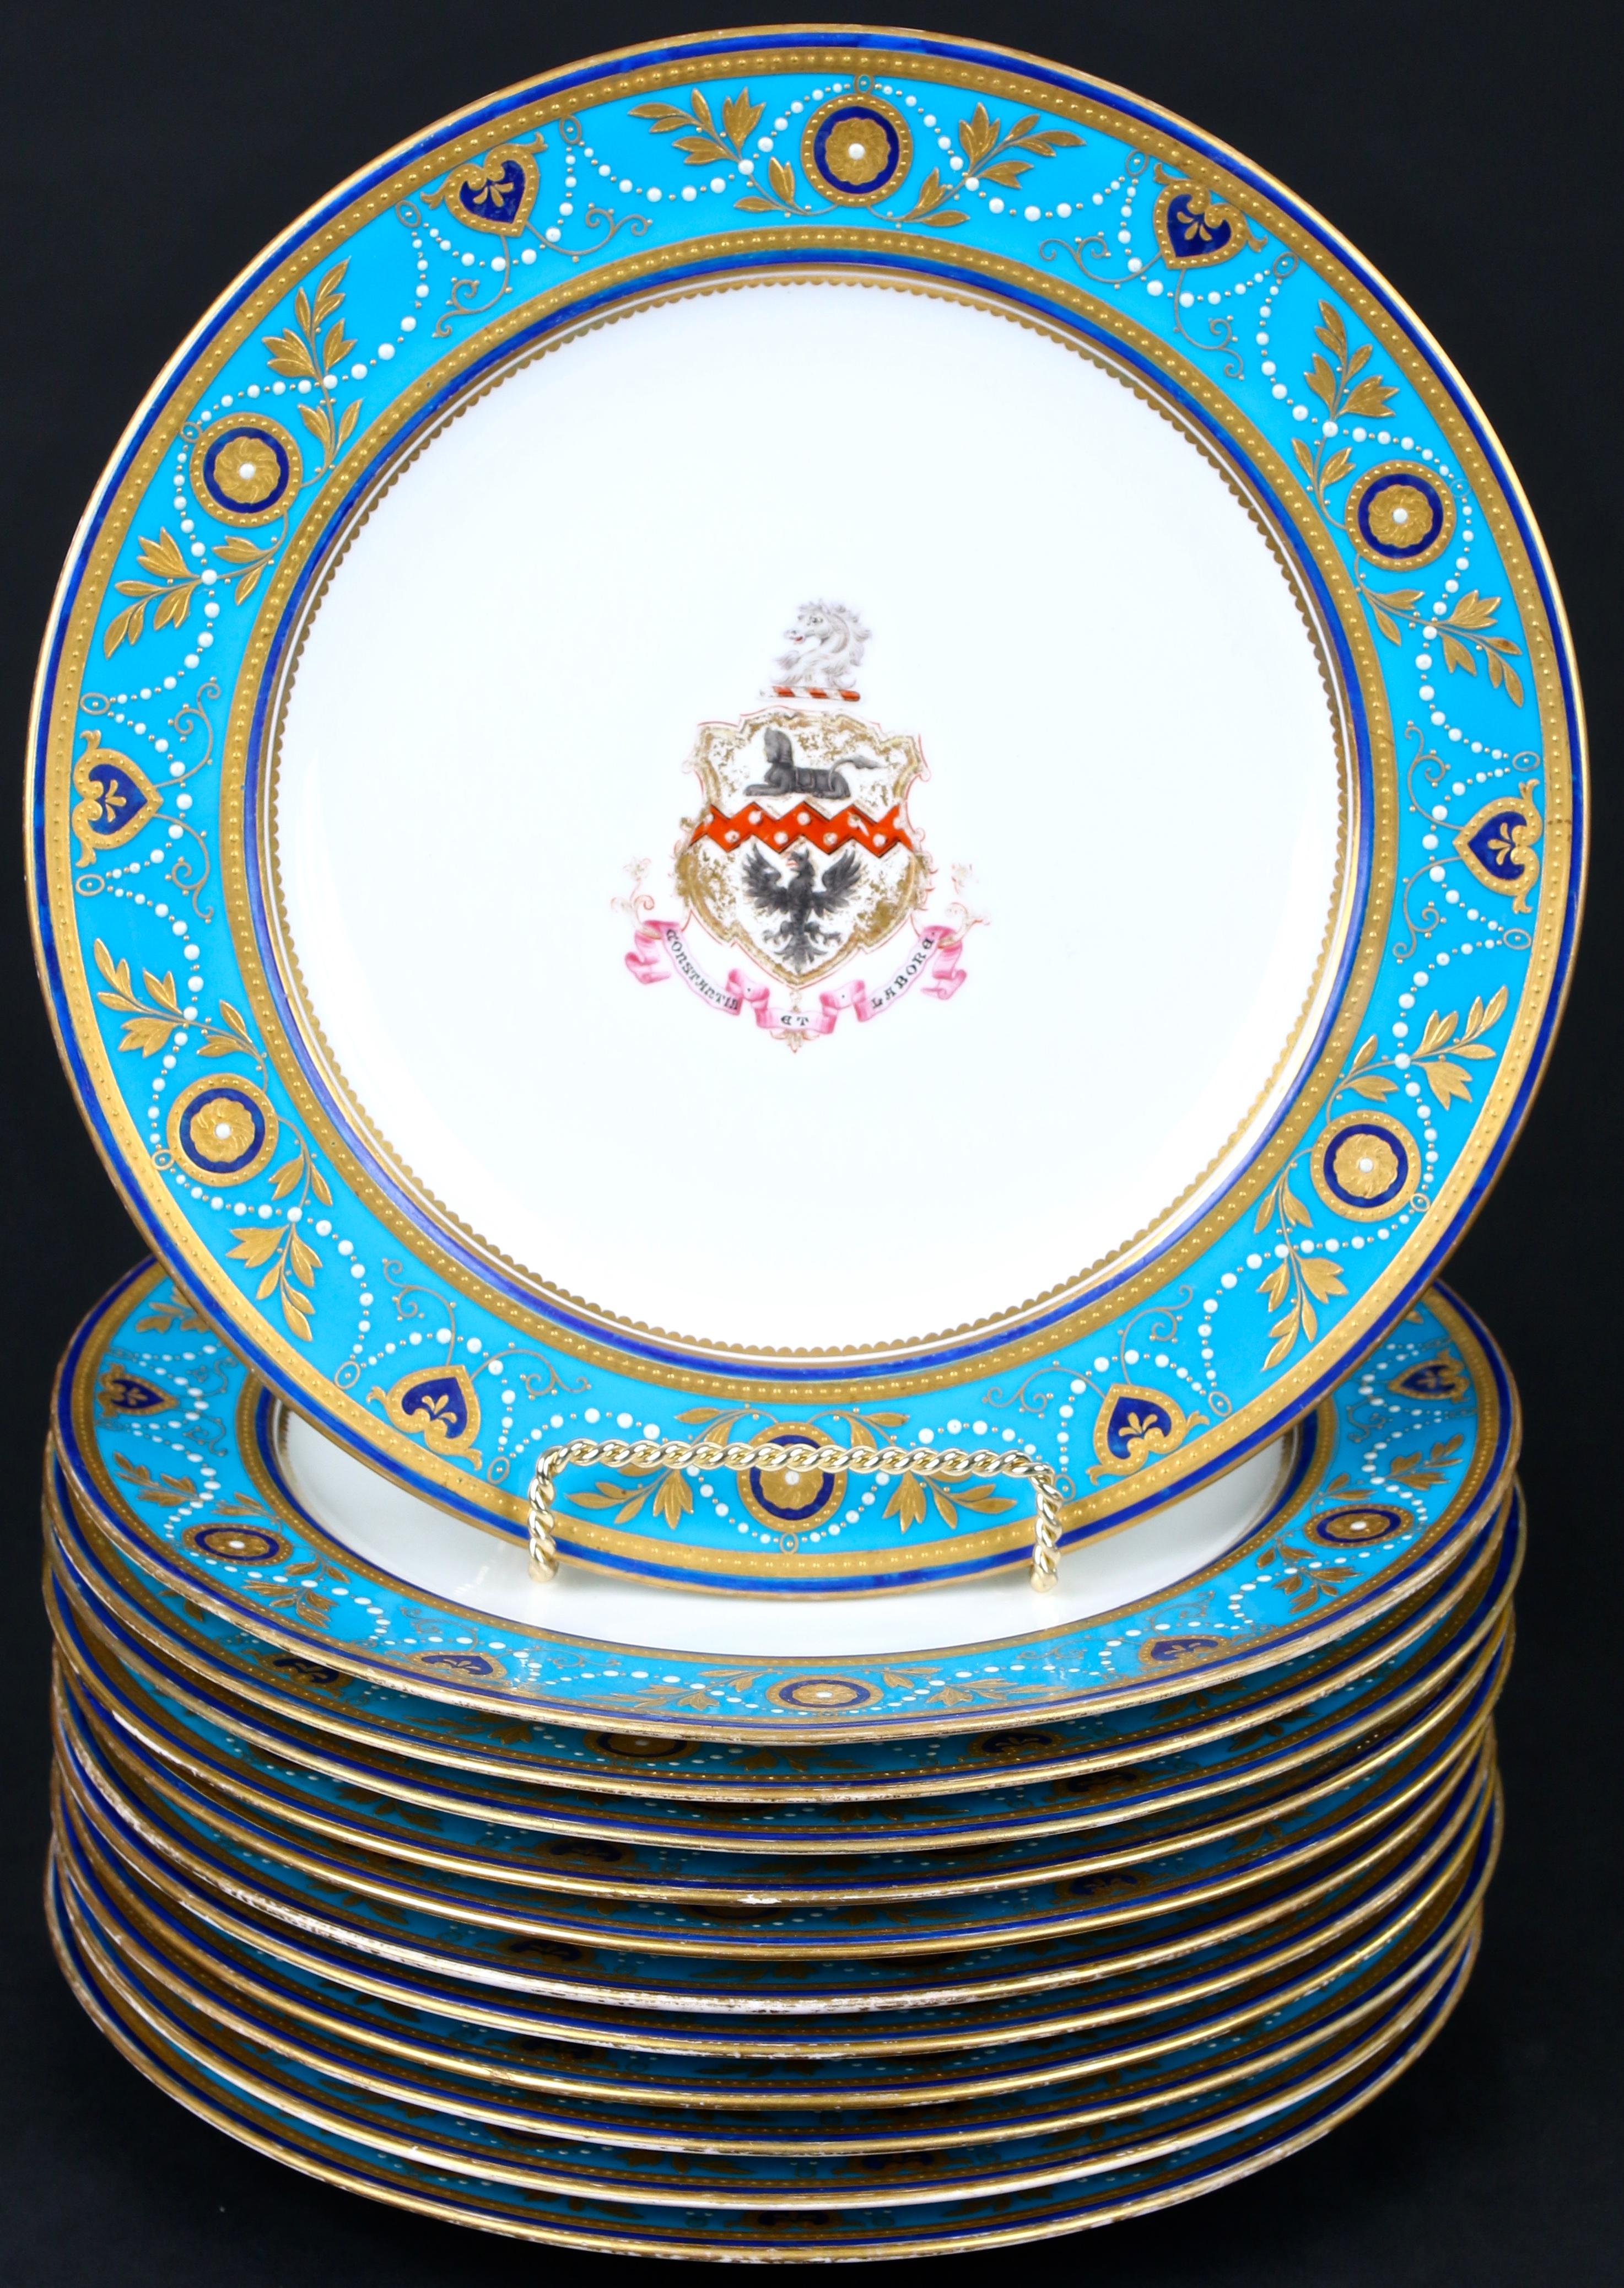 Enameled Service of Minton Turquoise and Gold Encrusted Armorial Plates with Side Plates For Sale